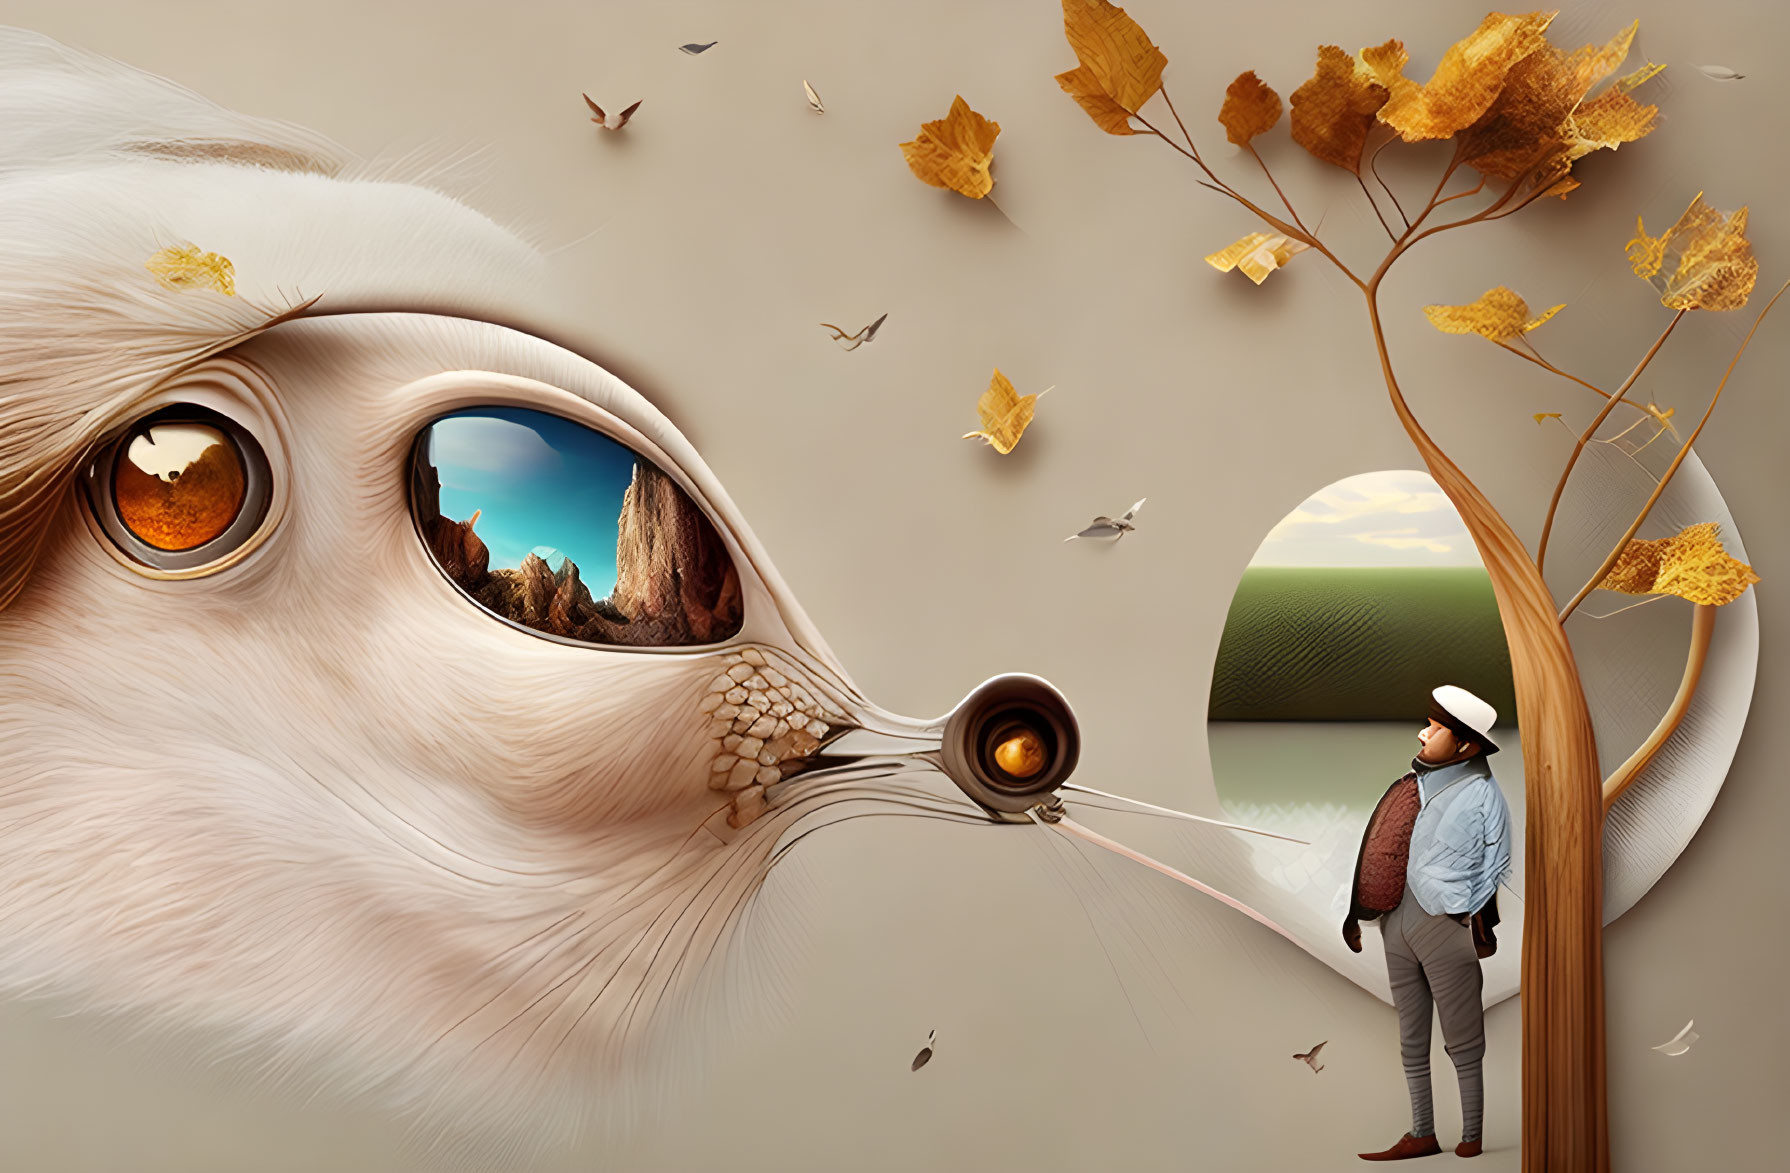 Surreal illustration of man with telescope mirroring as giant white animal